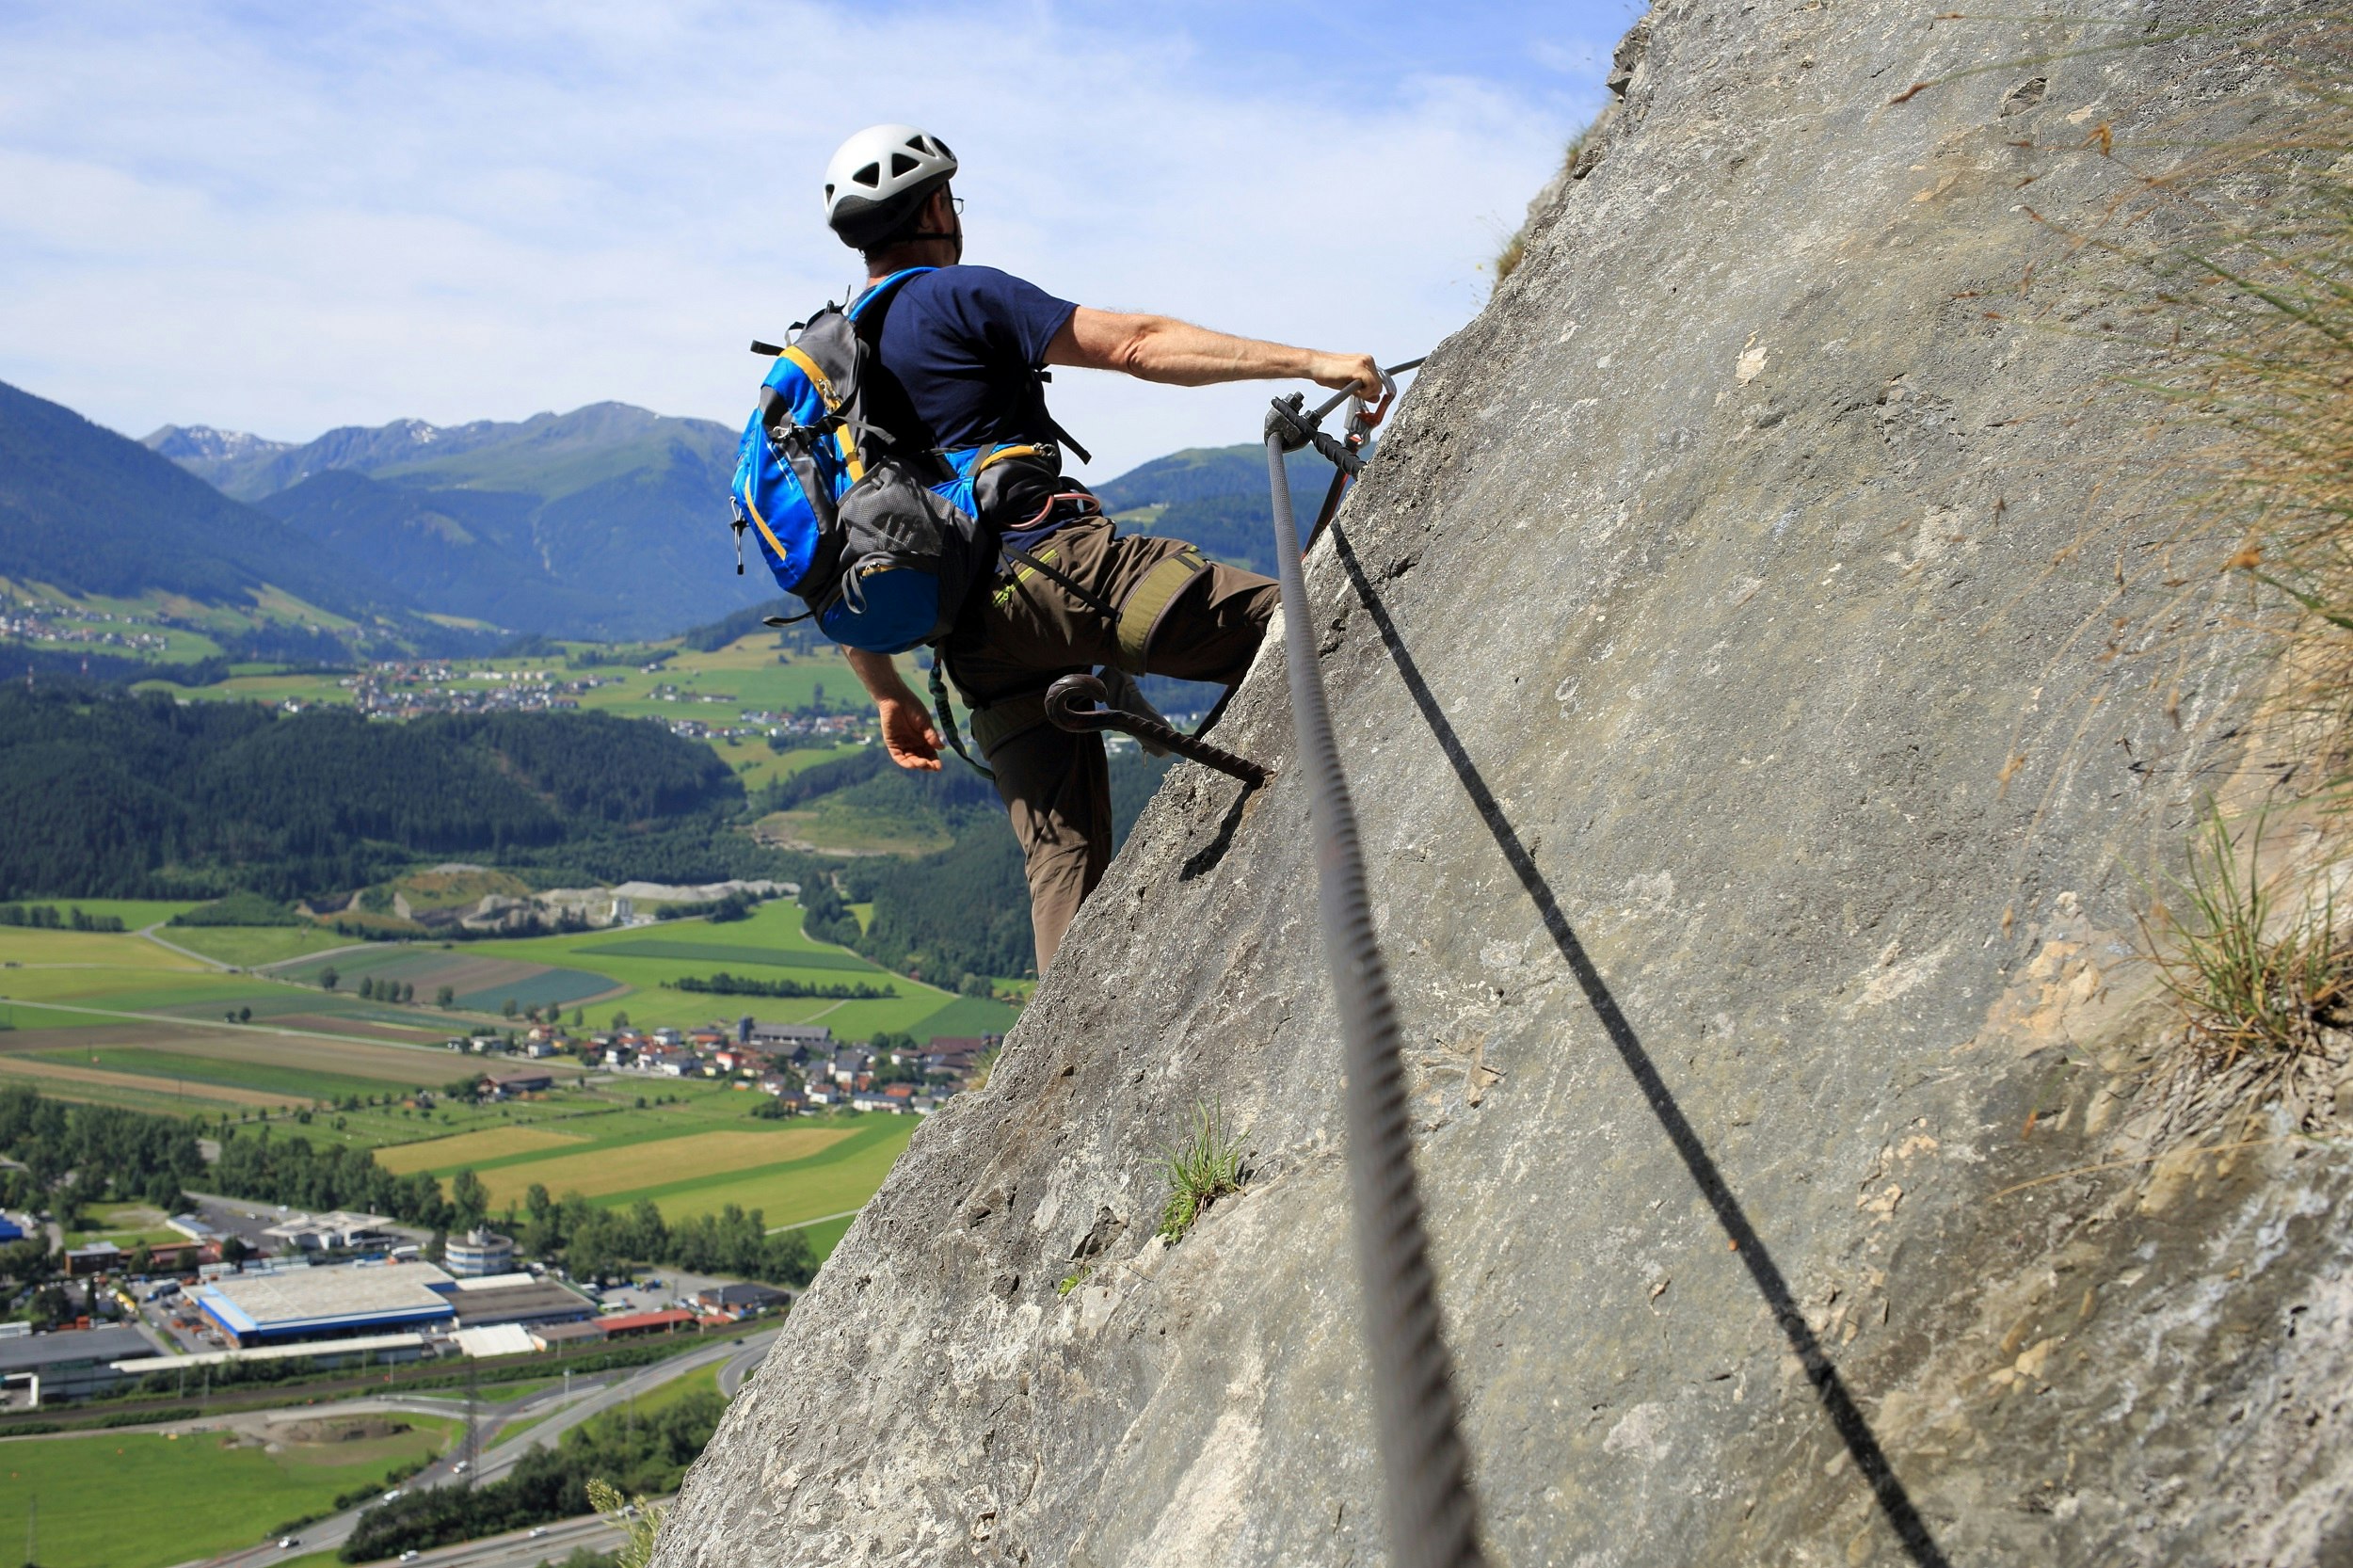 A mountaineer leans off a 45 degree rock face, with one hand extended to a steel via ferrata cable that is running horizontally along the rock; far below are green alpine valleys covered in forest and famers' fields.